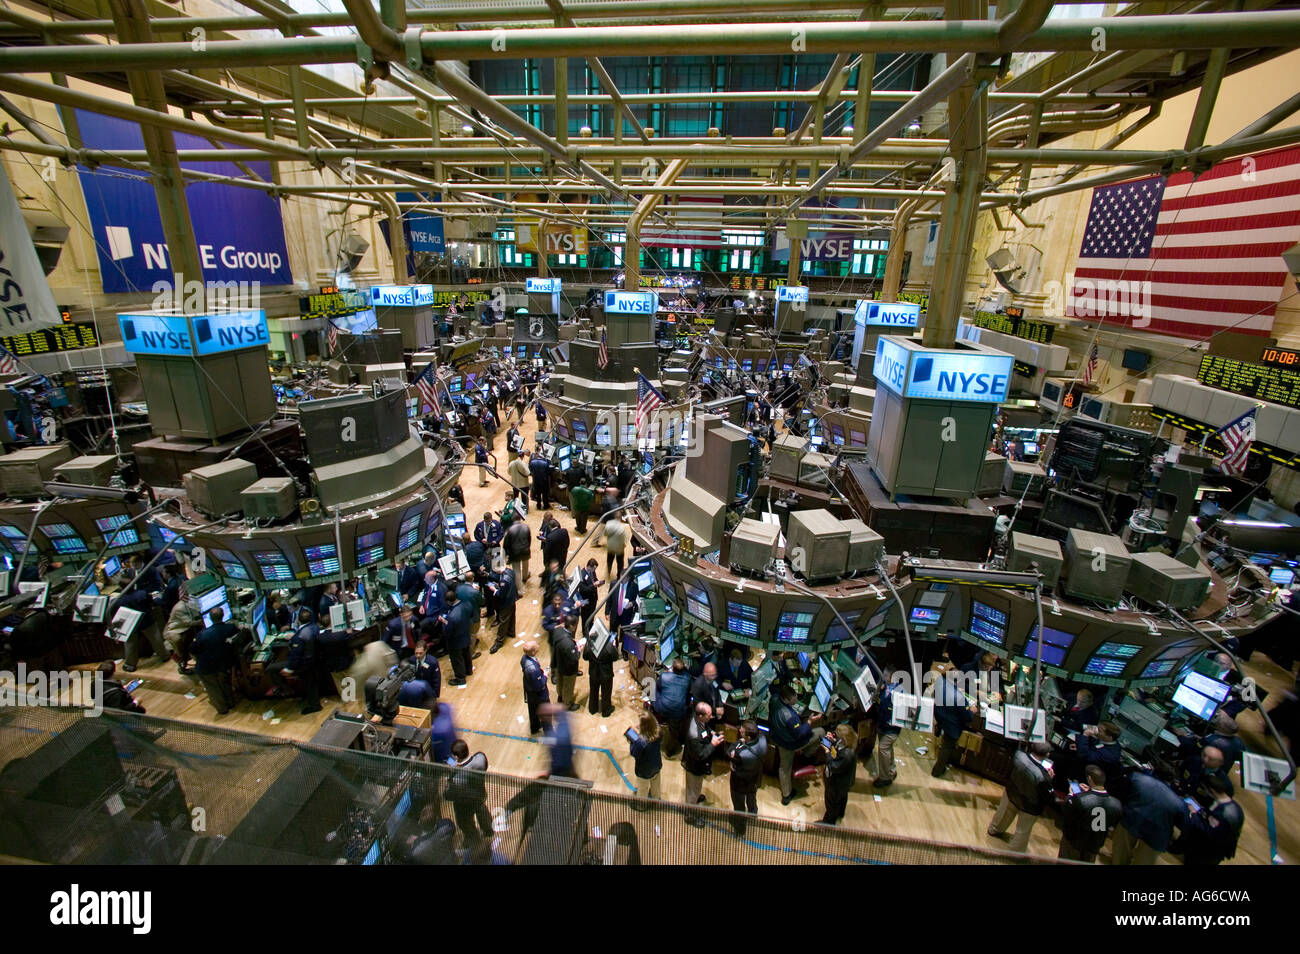 Wide angle view of the main trading room at the NYSE in New York City USA July 2006 Stock Photo